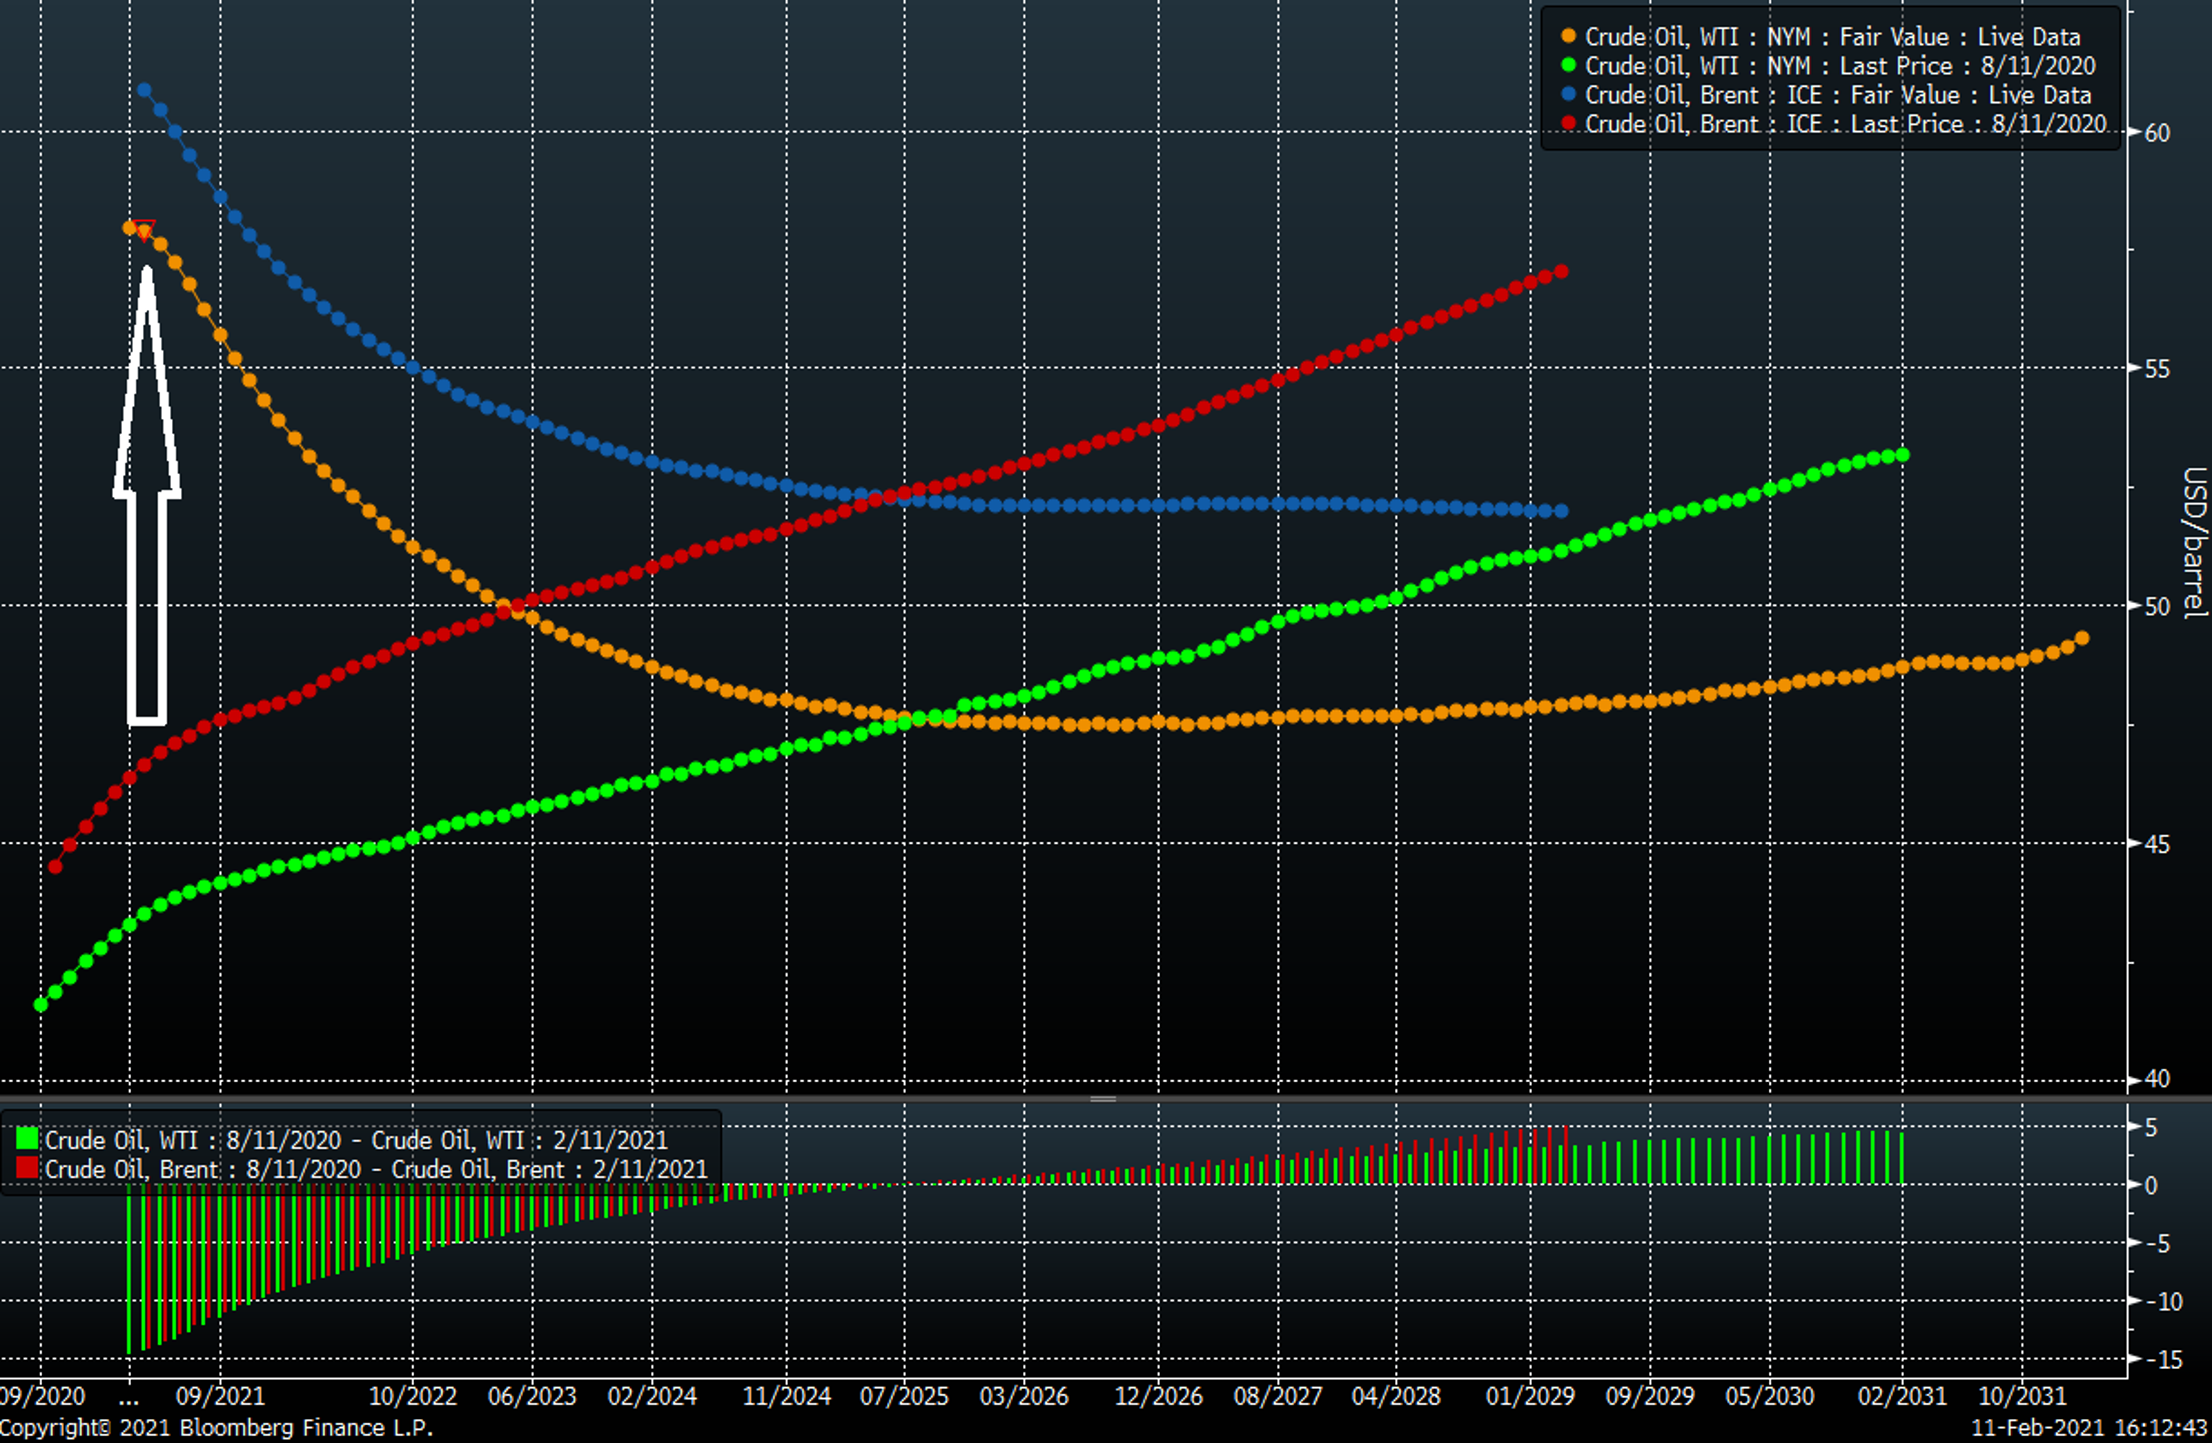 WTI and Brent Oil actual term structure vs. 6 months ago, the forward curve moving from contango to backwardation